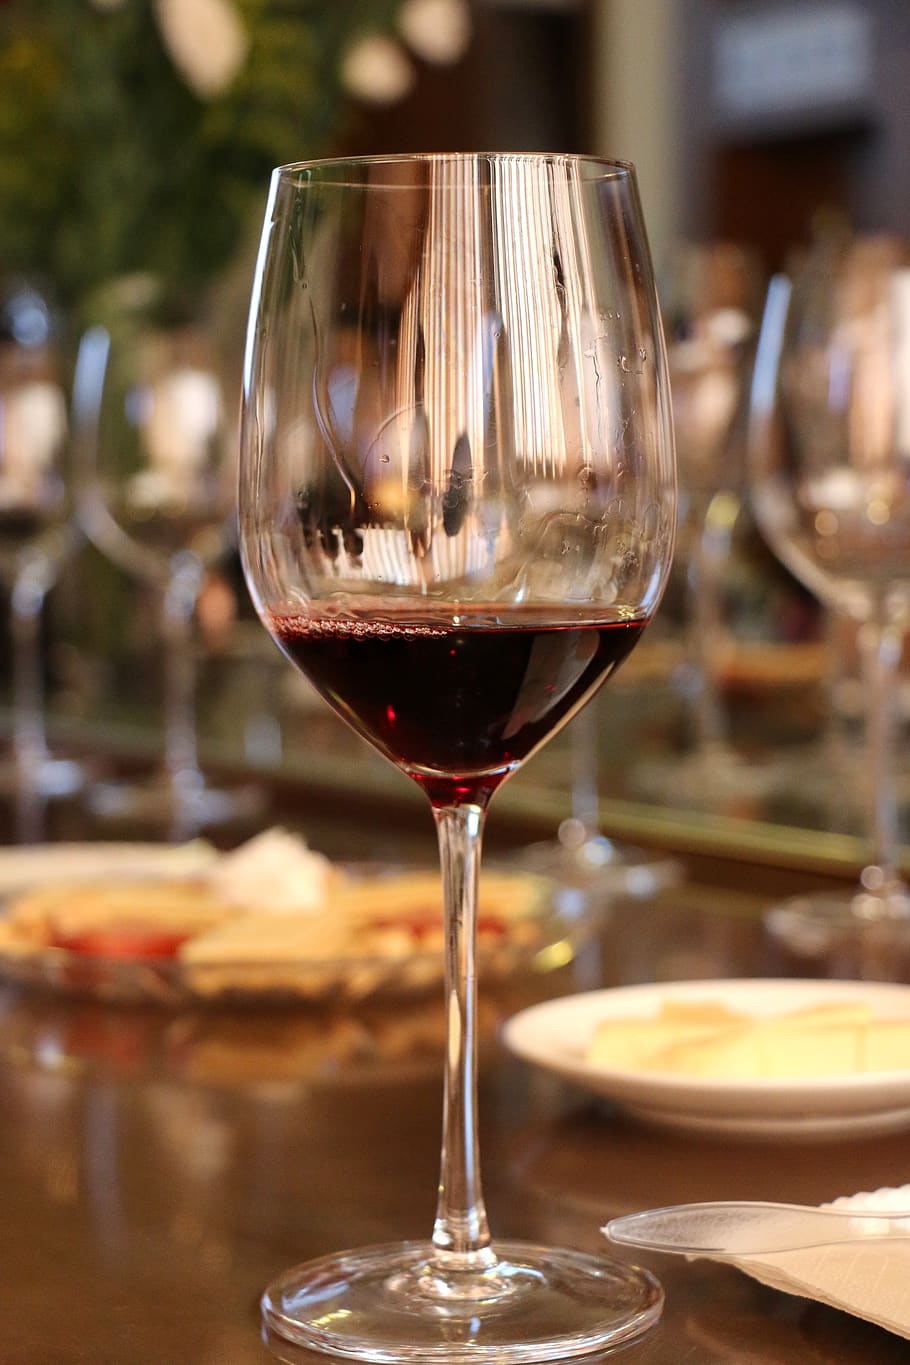 wine, wine glasses, drink red wine, wineglass, food and drink, glass, alcohol, table, refreshment, drink